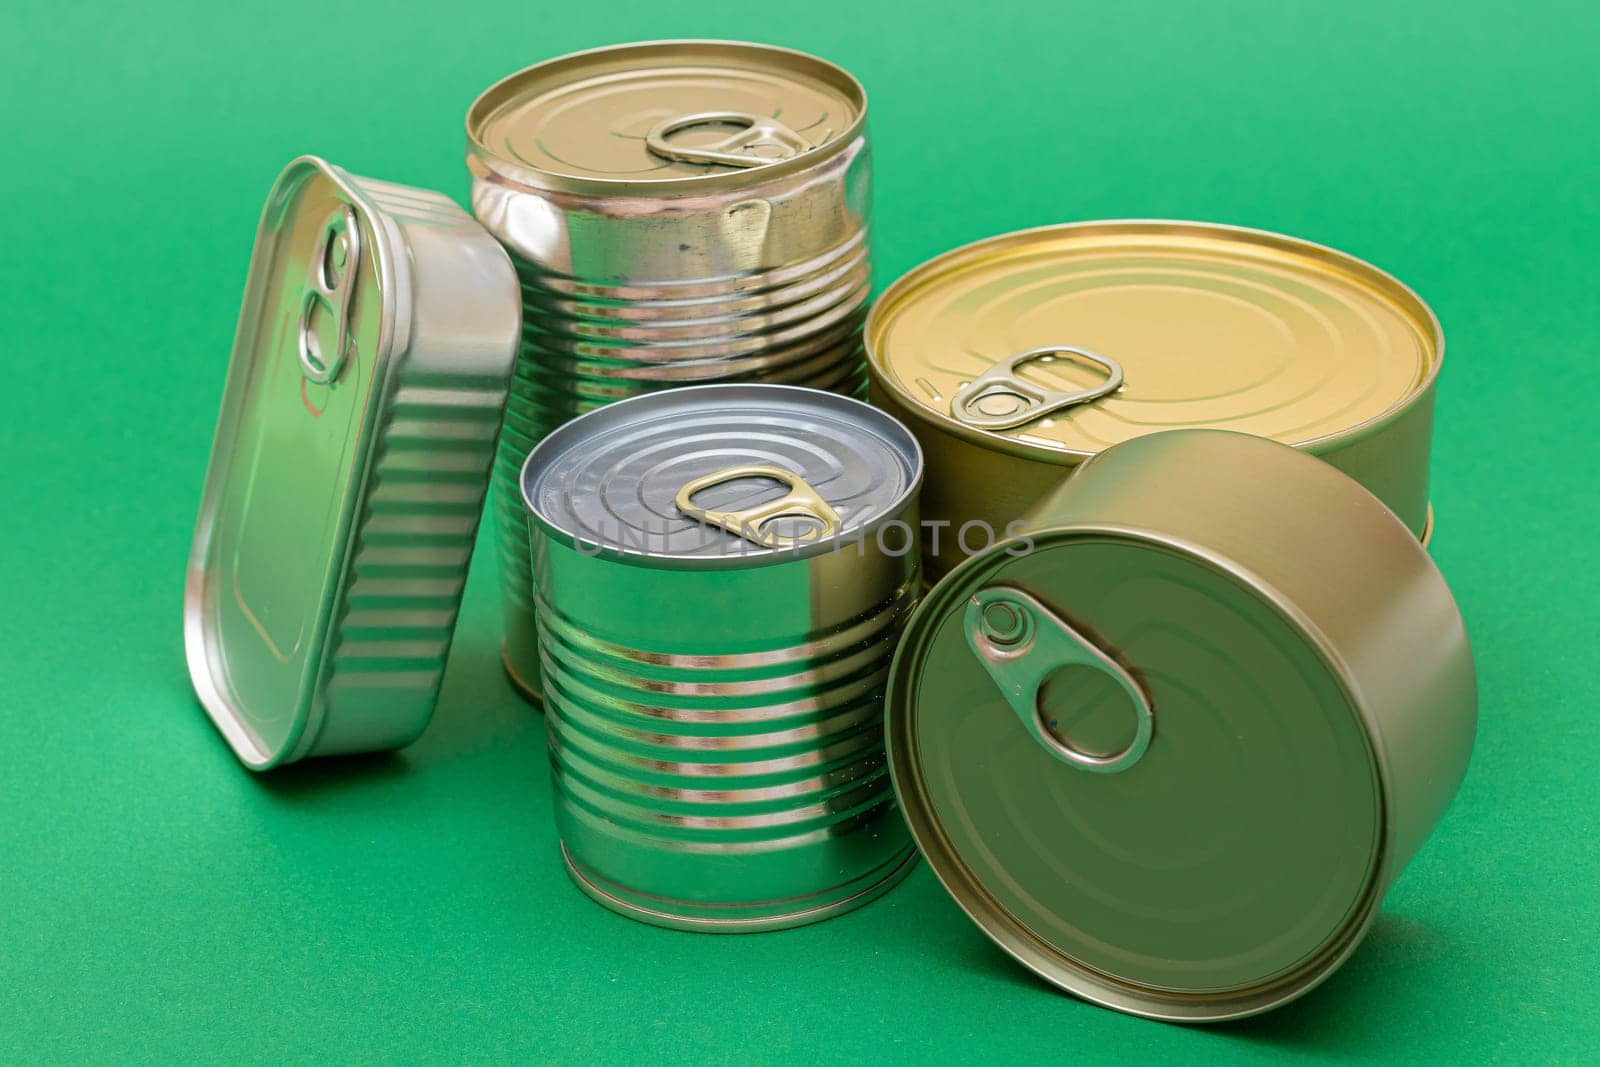 A Group of Stacked Tin Cans with Blank Edges on Green Background. Canned Food. Different Aluminum Cans for Safe and Long Term Storage of Food. Steel Sealed Food Storage Containers